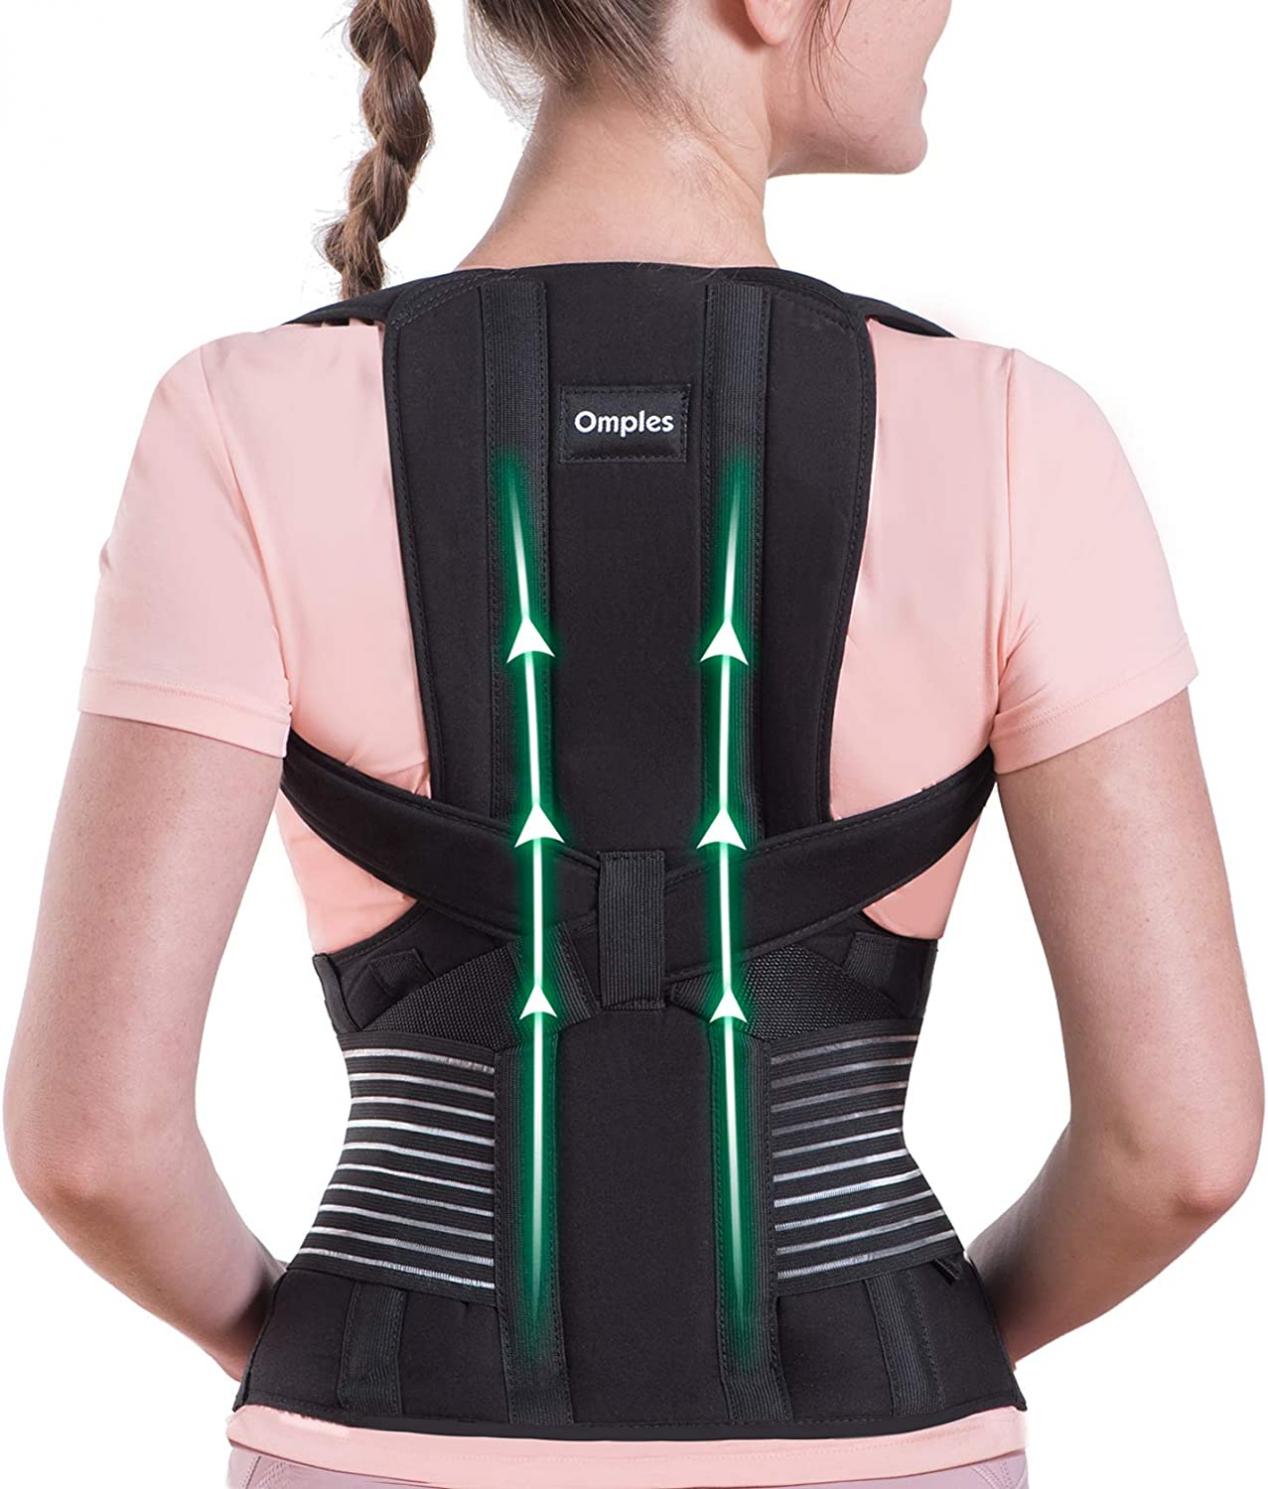 Omples Posture Corrector for Women and Men Back Brace Straightener Shoulder Upright Support Trainer for Body Correction and Neck Pain Relief, Medium (Waist 34-38 inch), Patent Pending